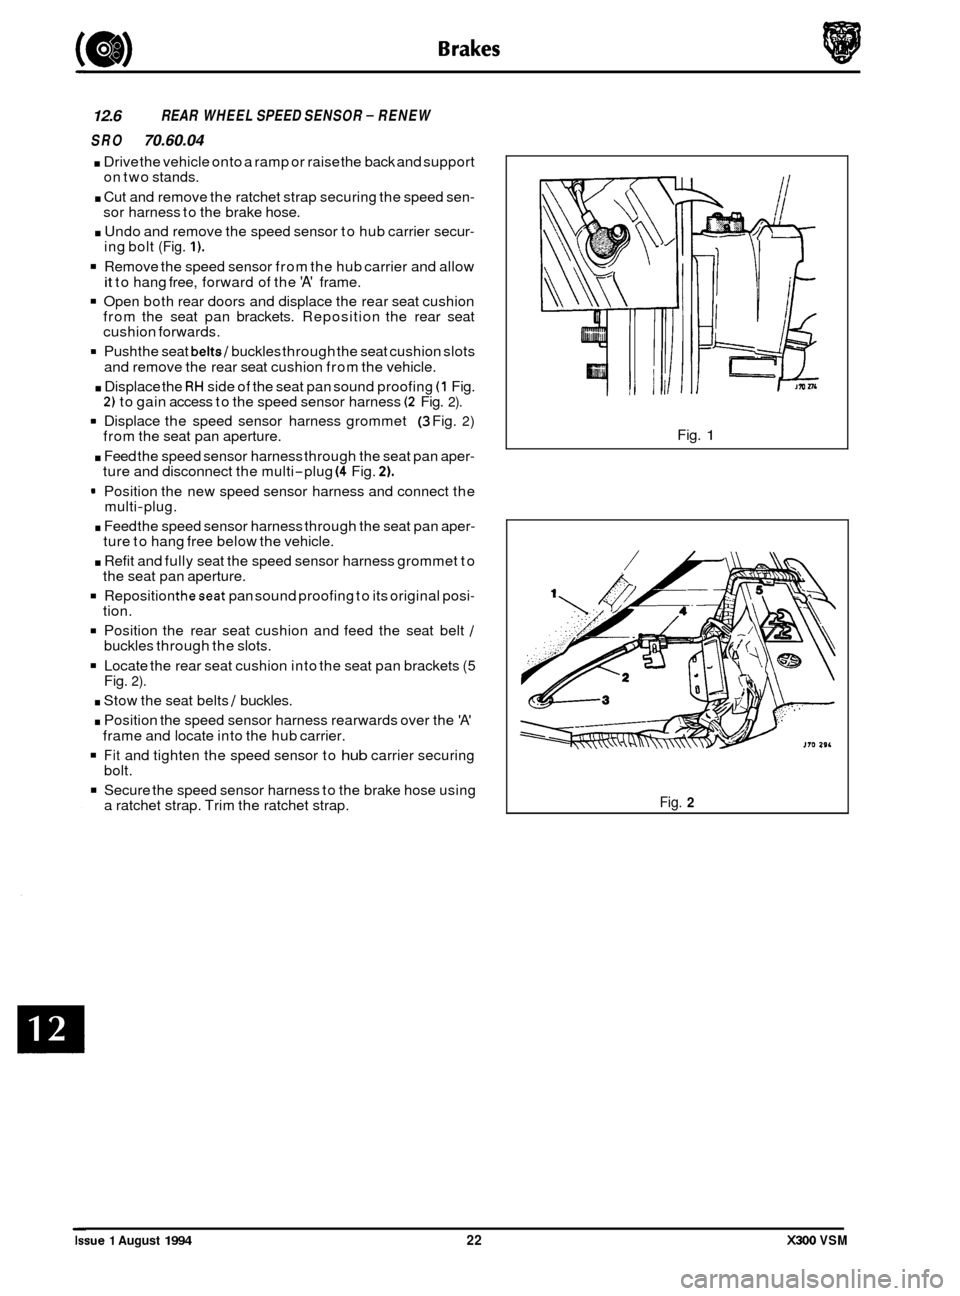 JAGUAR XJ6 1994 2.G Workshop Manual 12.6 REAR WHEEL  SPEED SENSOR - RENEW 
SRO 
70.60.04 
. Drive  the vehicle  onto a ramp  or raise the  back and support 
on  two  stands. 
. Cut and  remove  the ratchet  strap securing  the speed sen